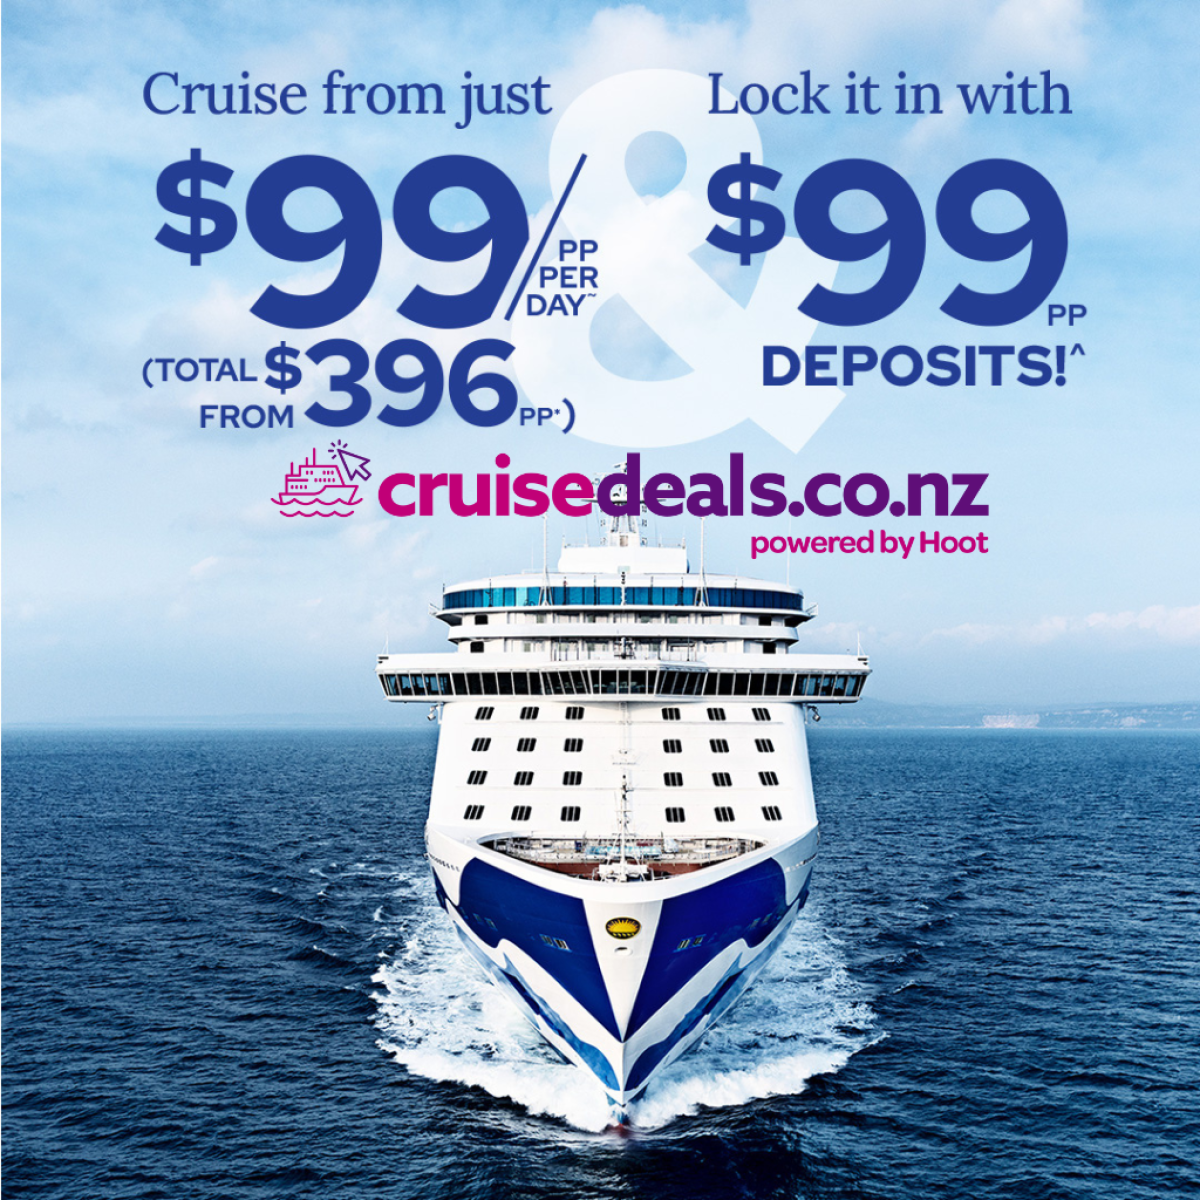 Princess Cruises - Cruise from $99 per day, Book for just $99pp deposit 